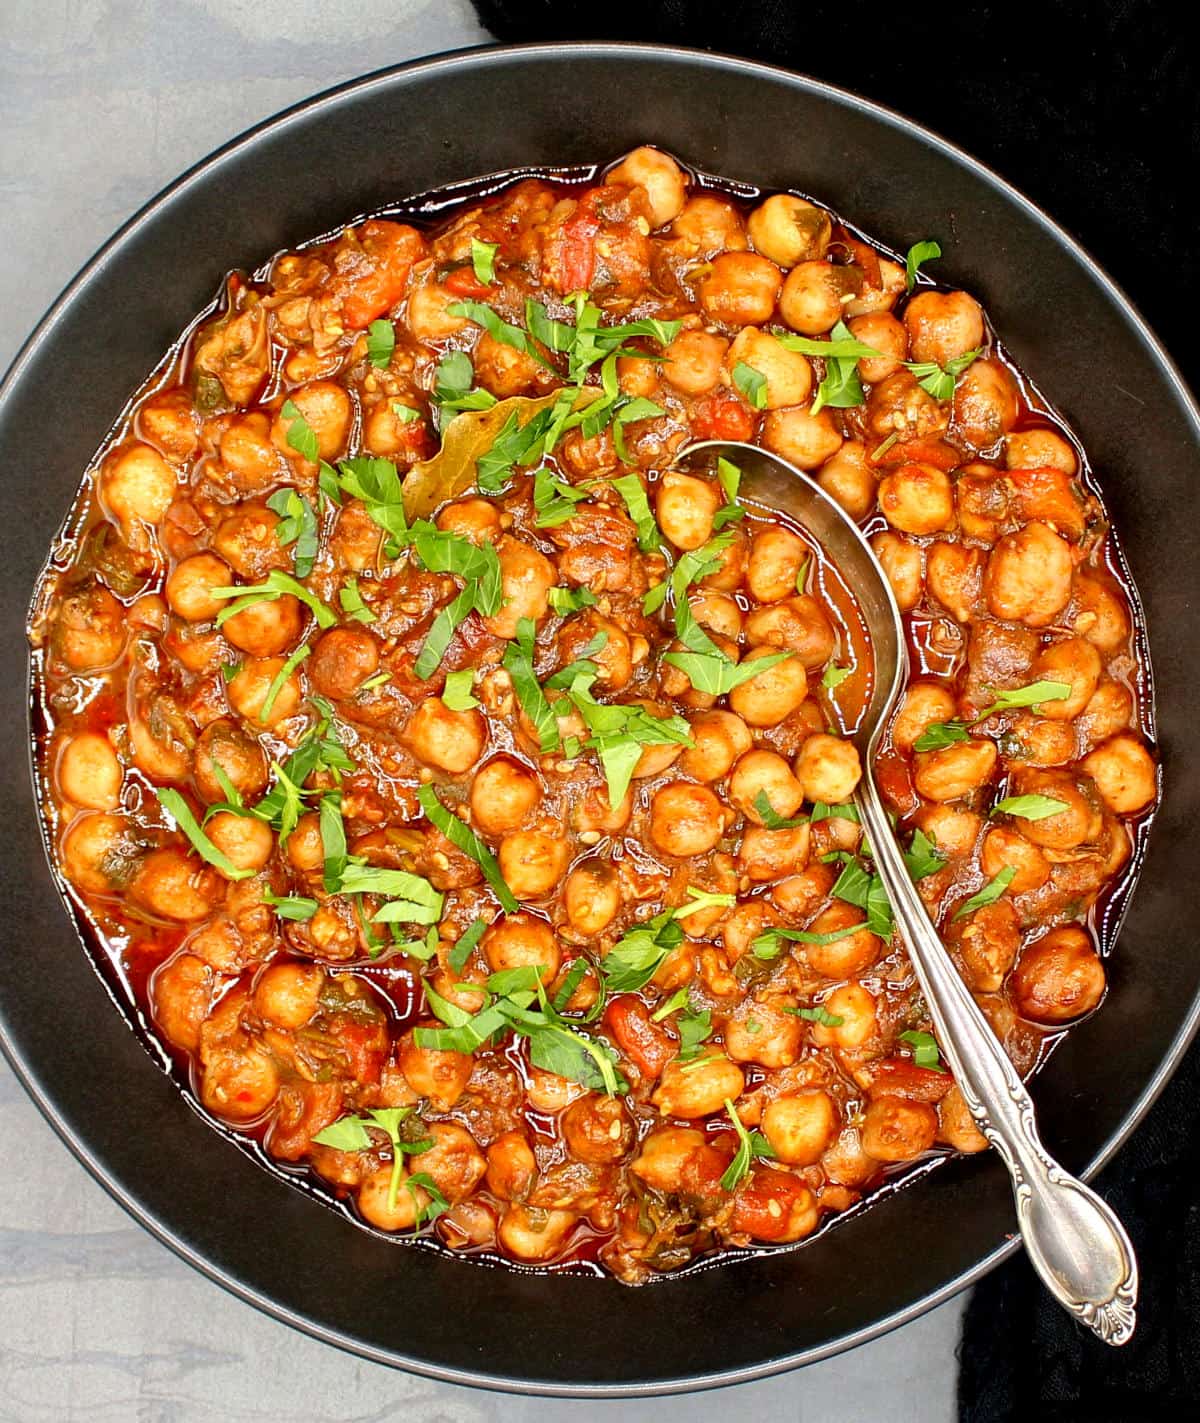 Lebanese chickpea stew in black bowl with spoon.